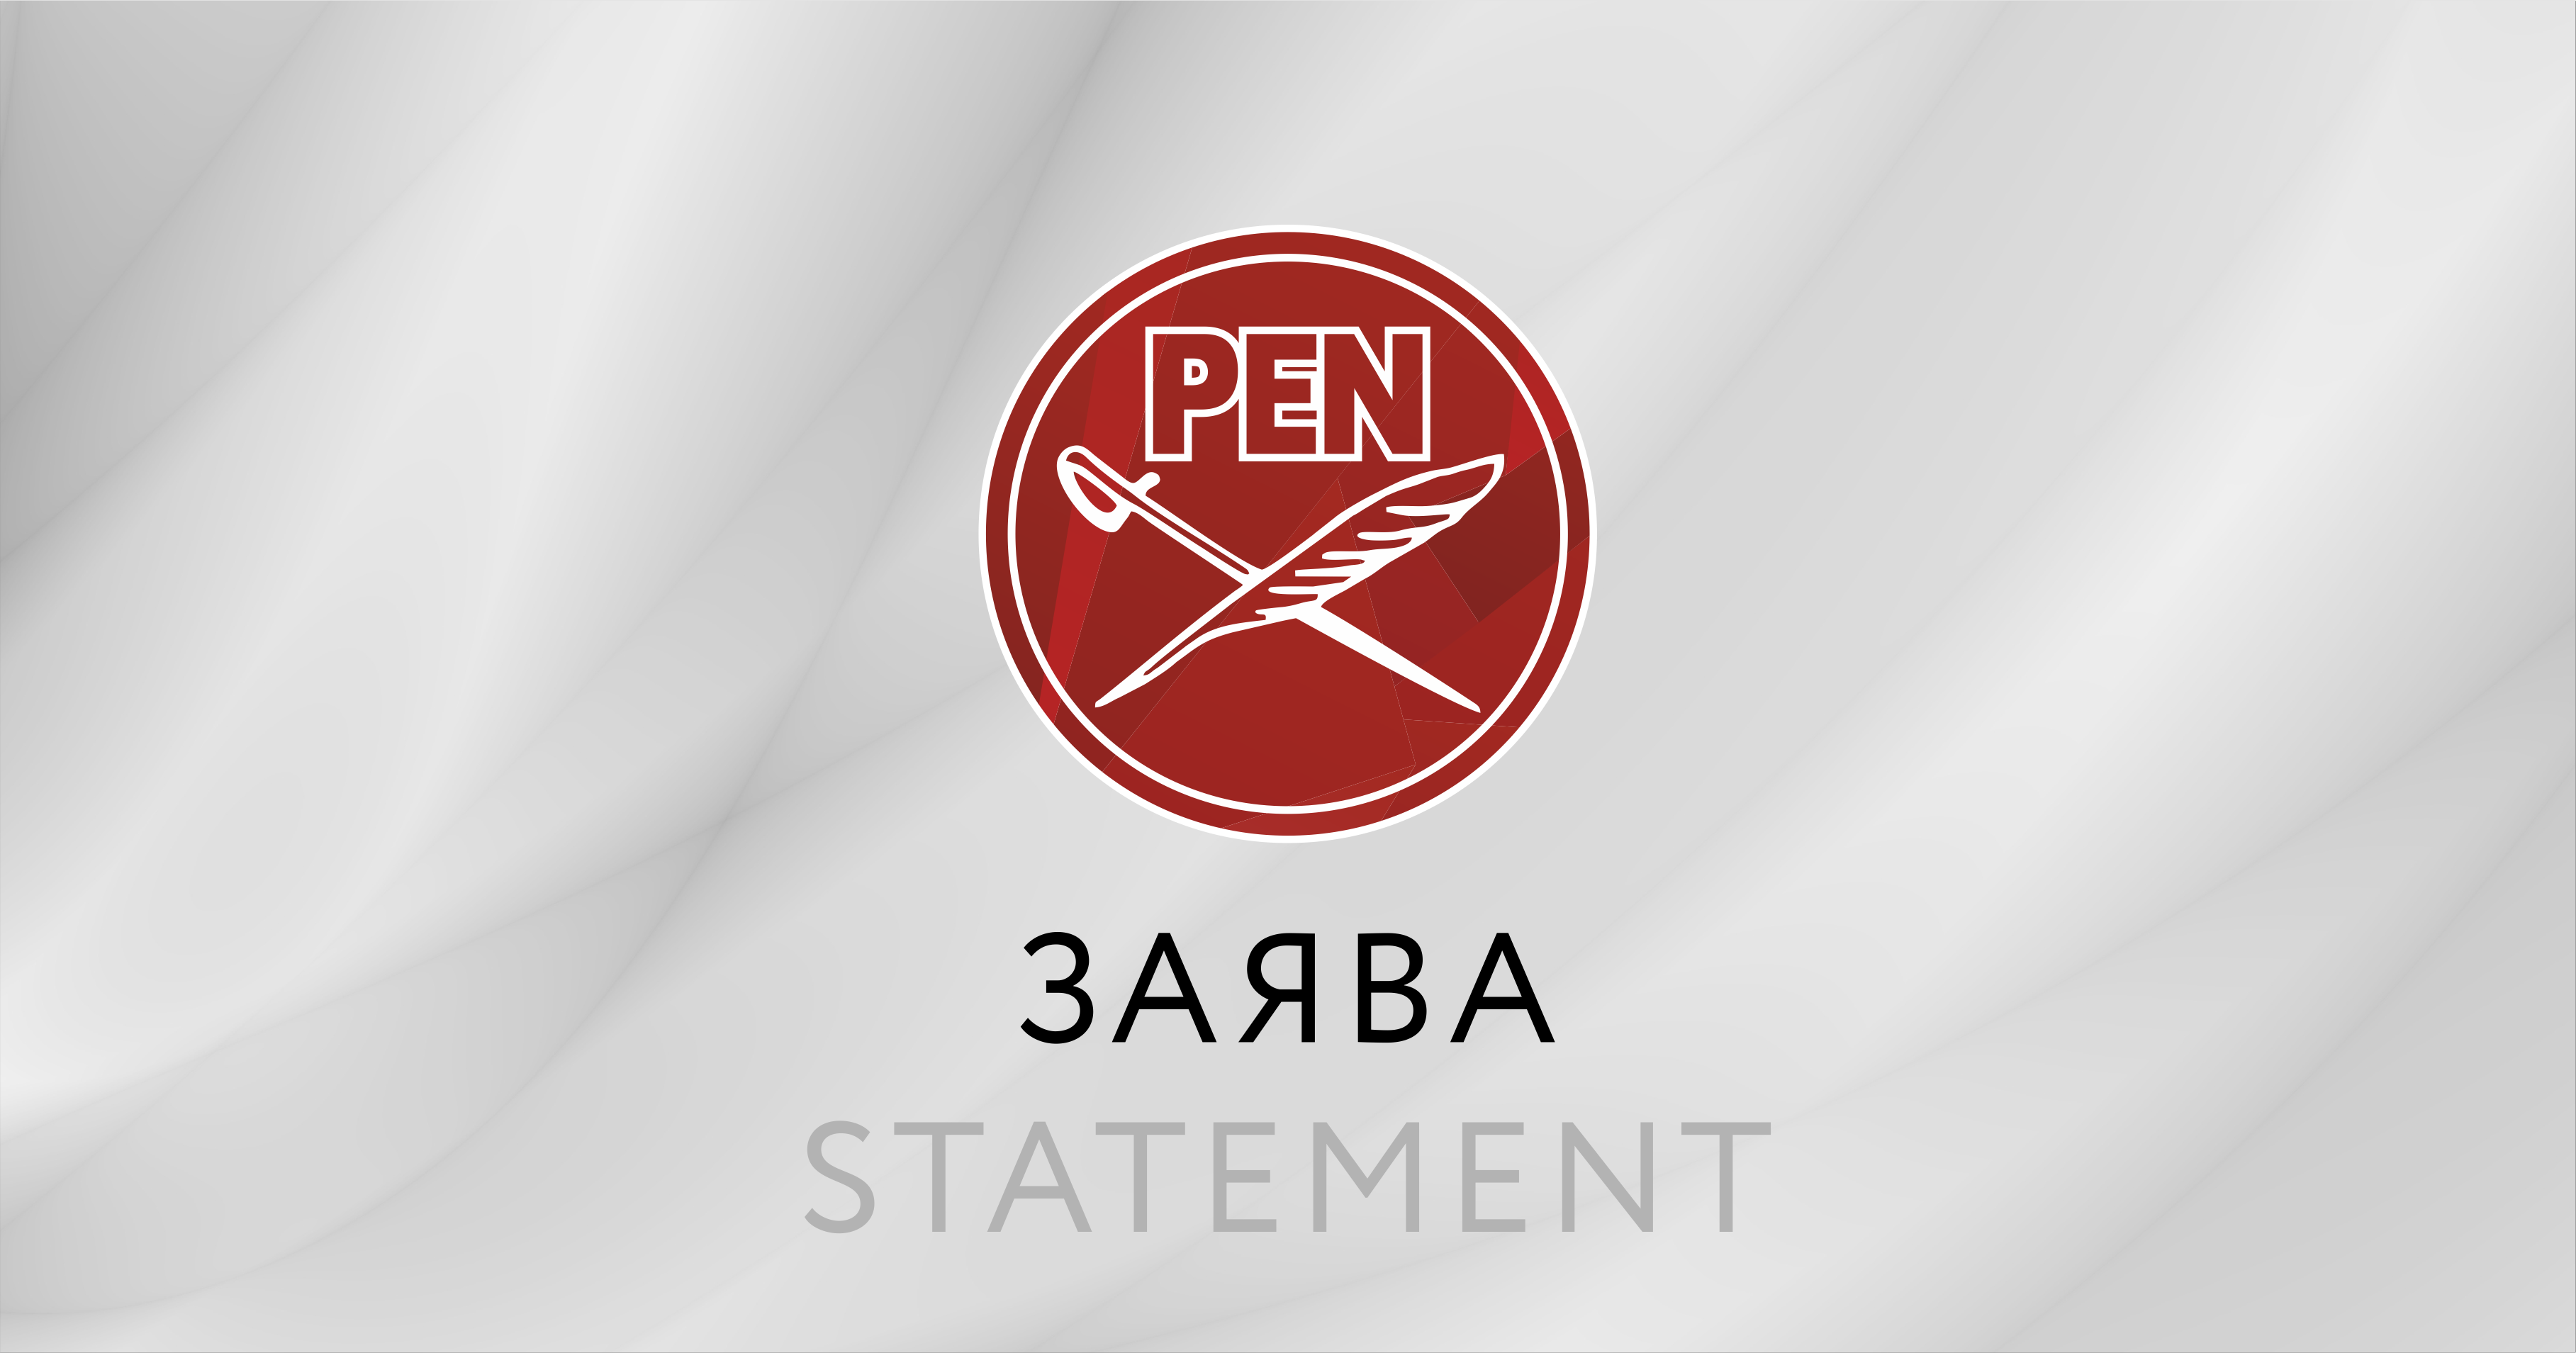 Joint statement of Belarusian PEN and Union of Belarusian Writers about cultural workers' repressions